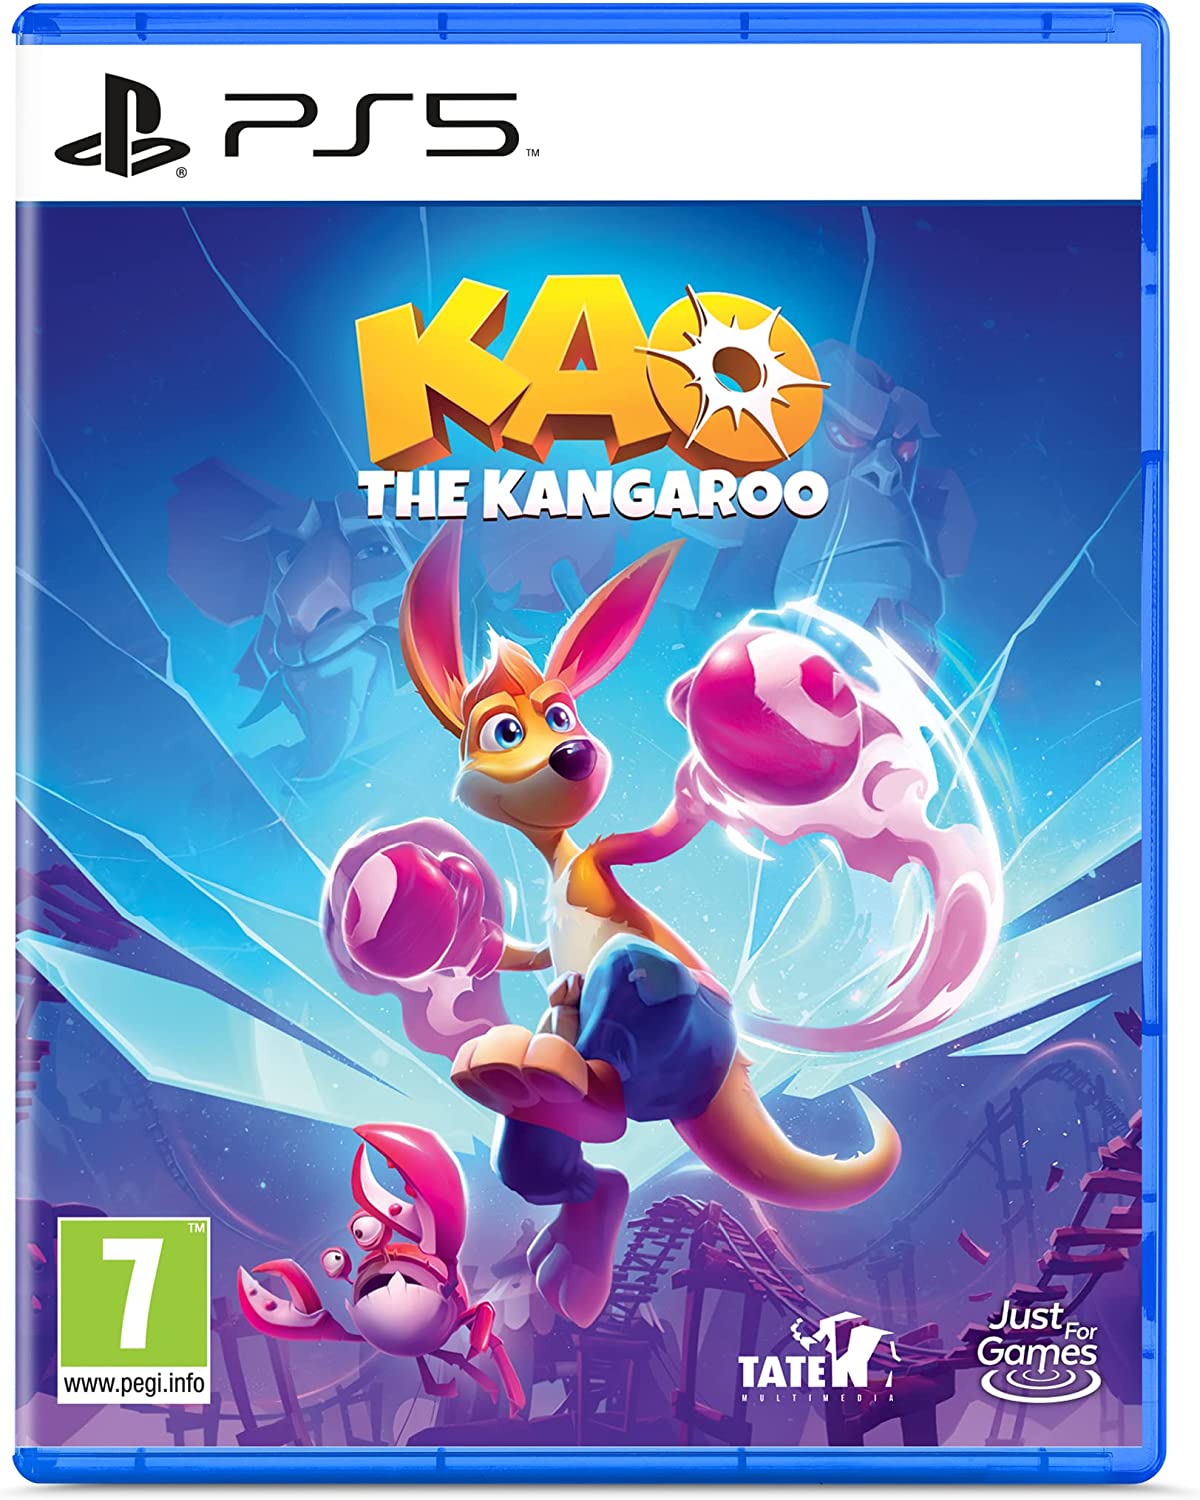 just-for-games-kao-the-kangaroo-ps5-front.jpg